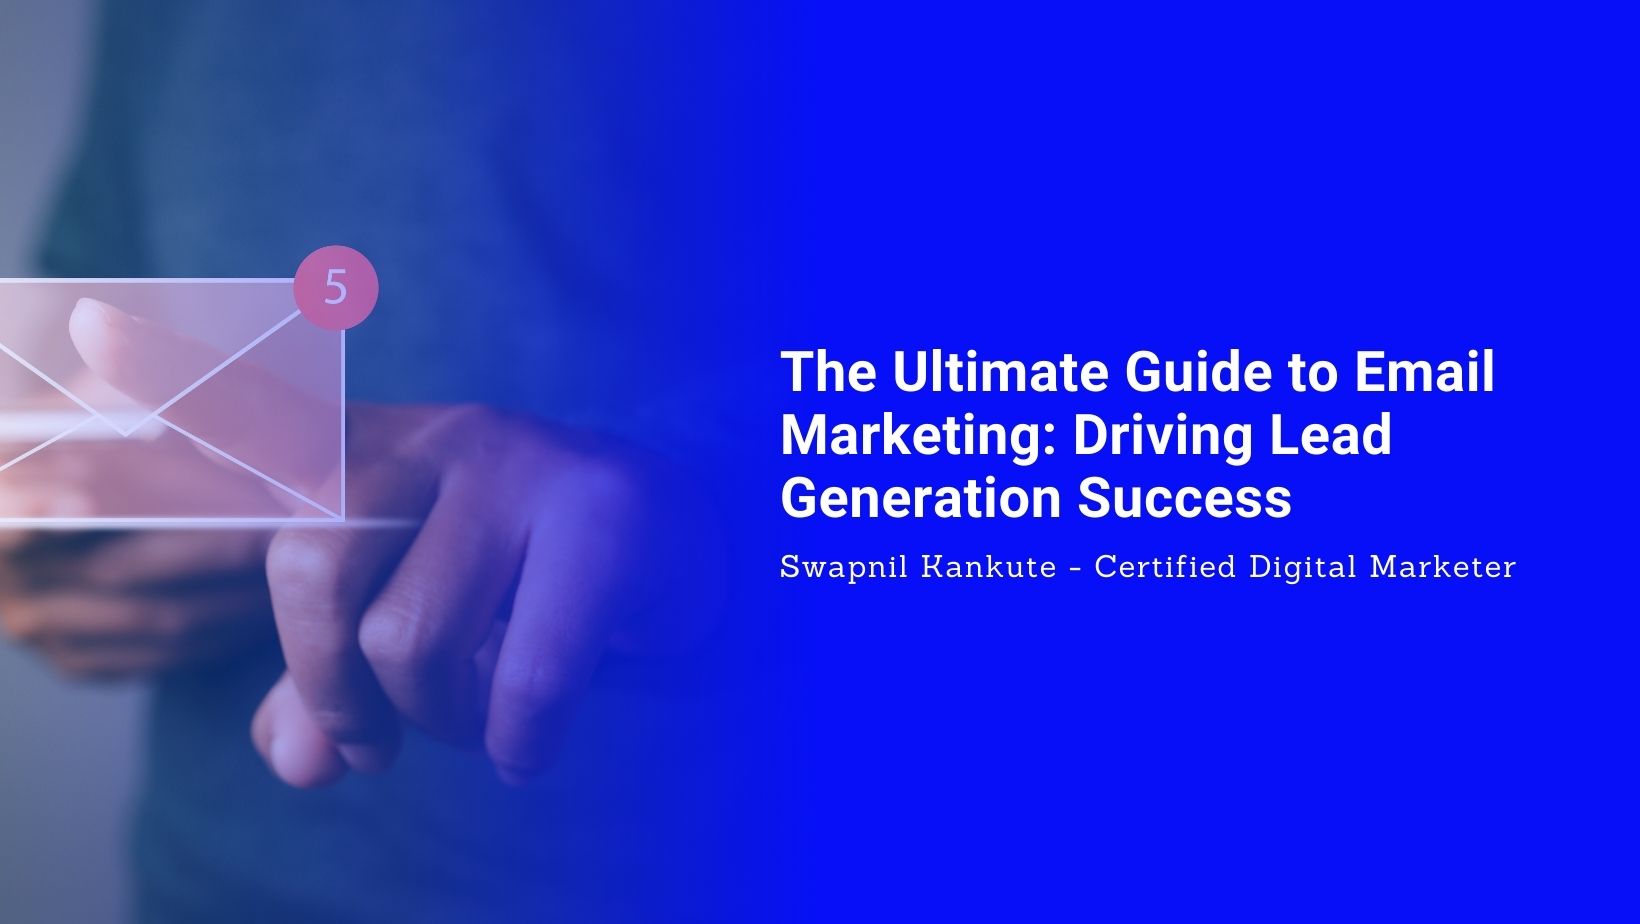 The Ultimate Guide to Email Marketing: Driving Lead Generation Success
